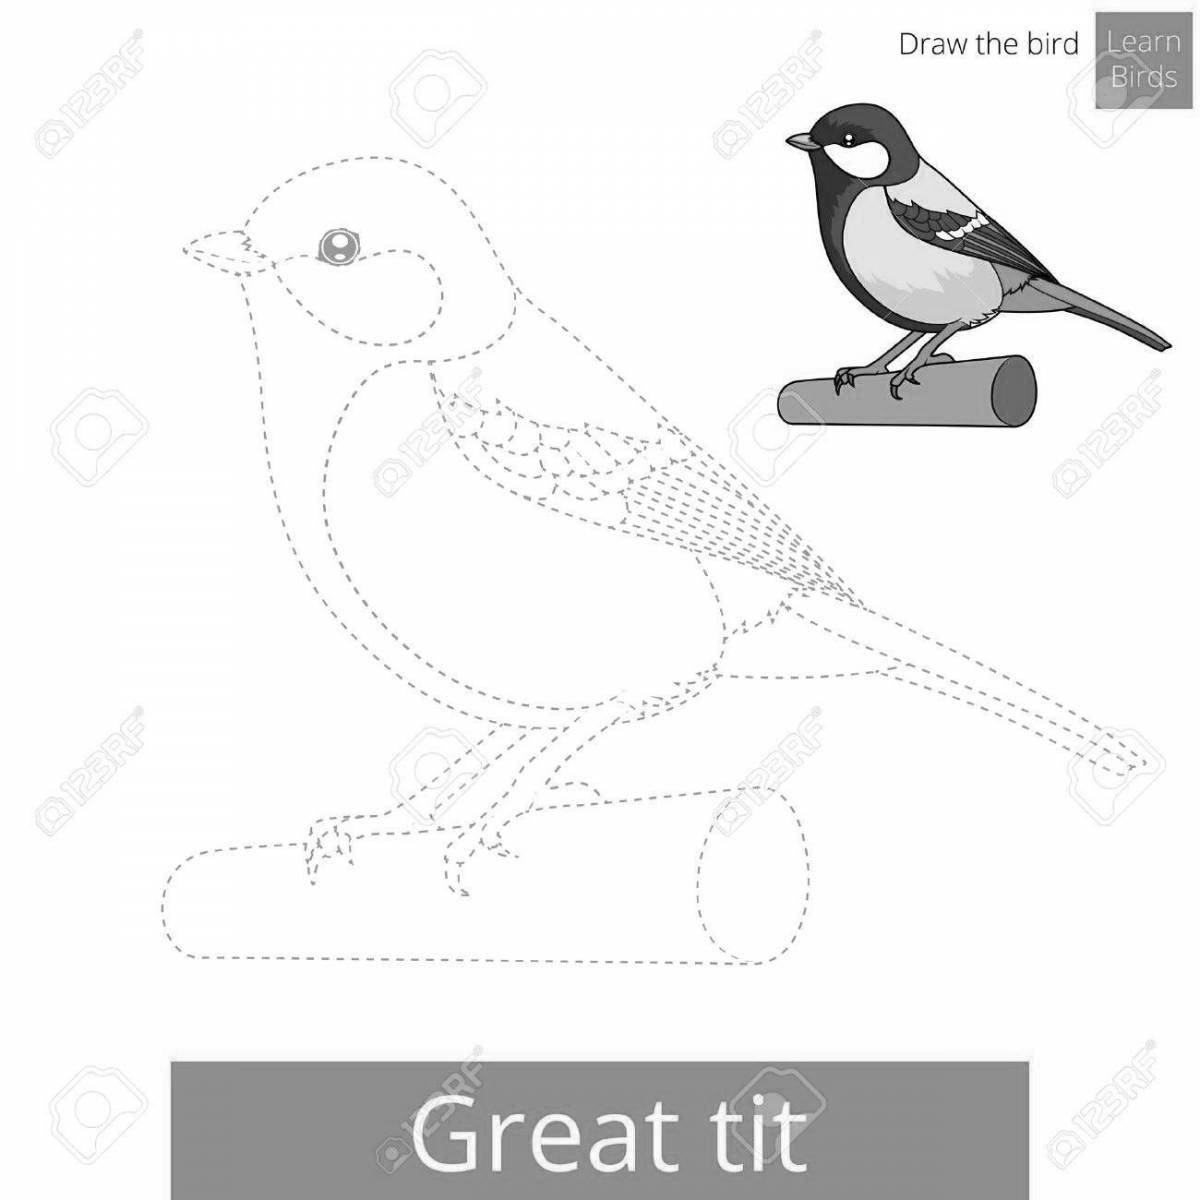 Sweet tit coloring page for 4-5 year olds